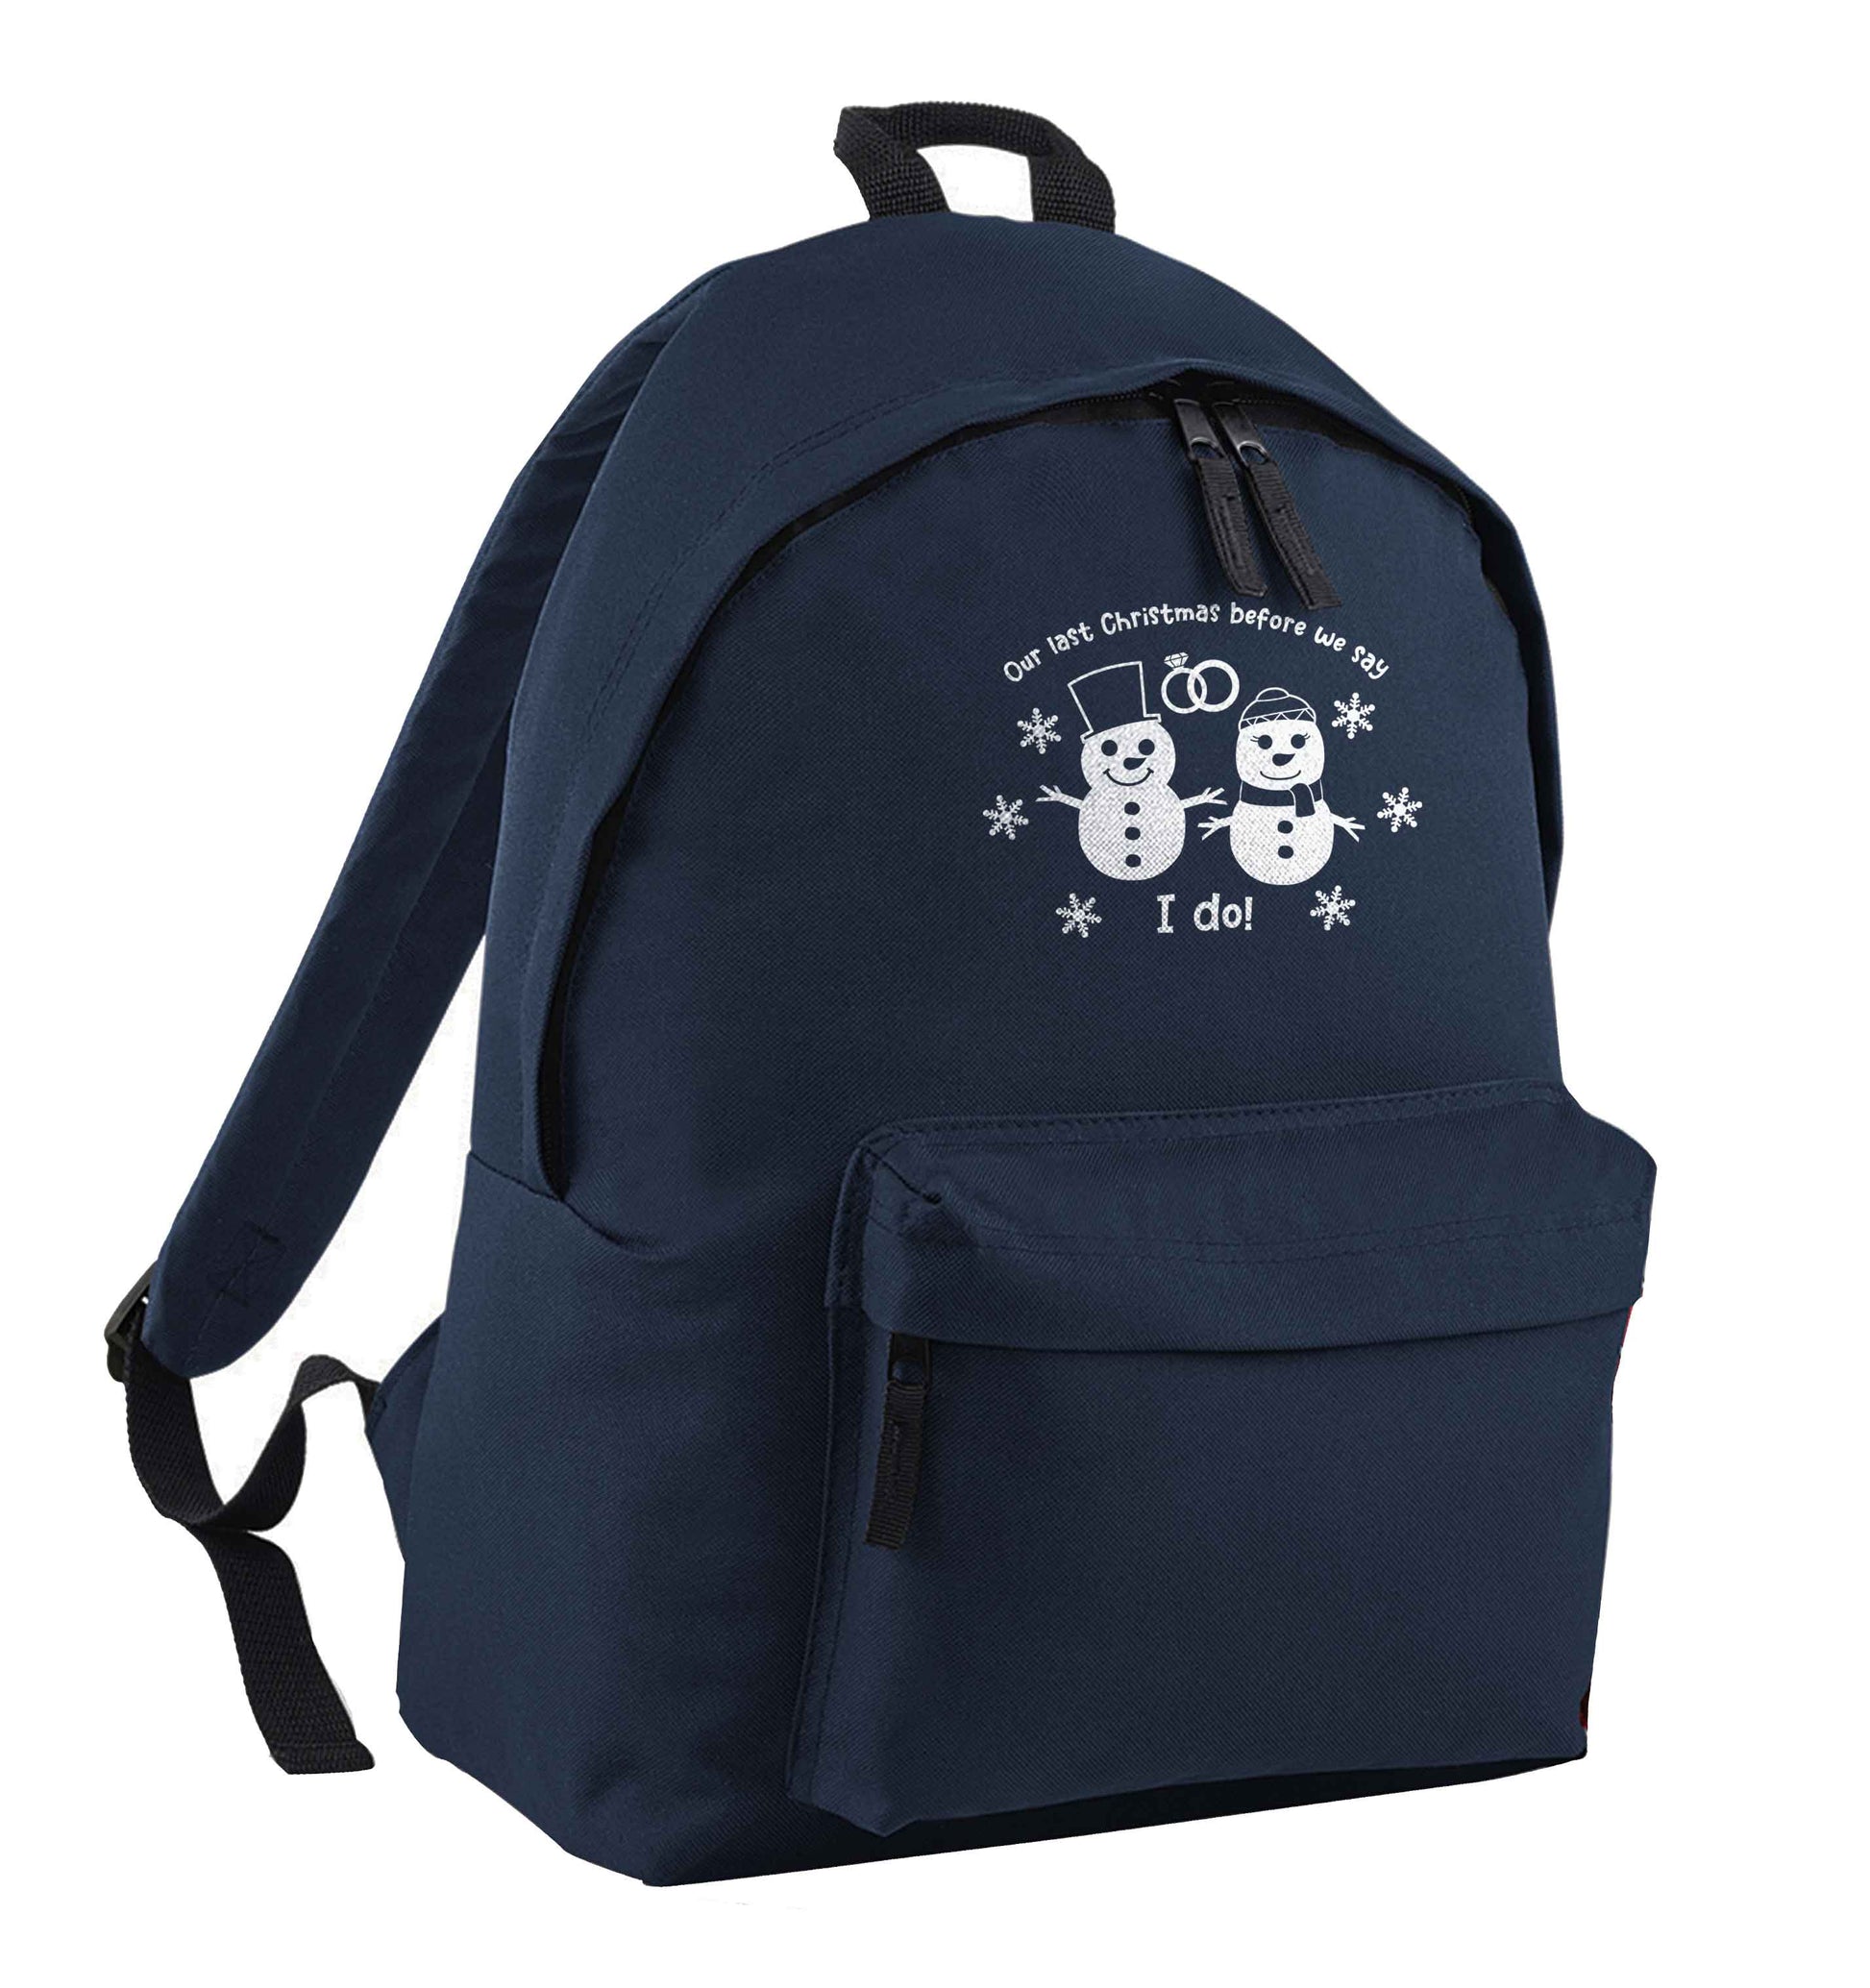 Last Christmas before we say I do navy adults backpack